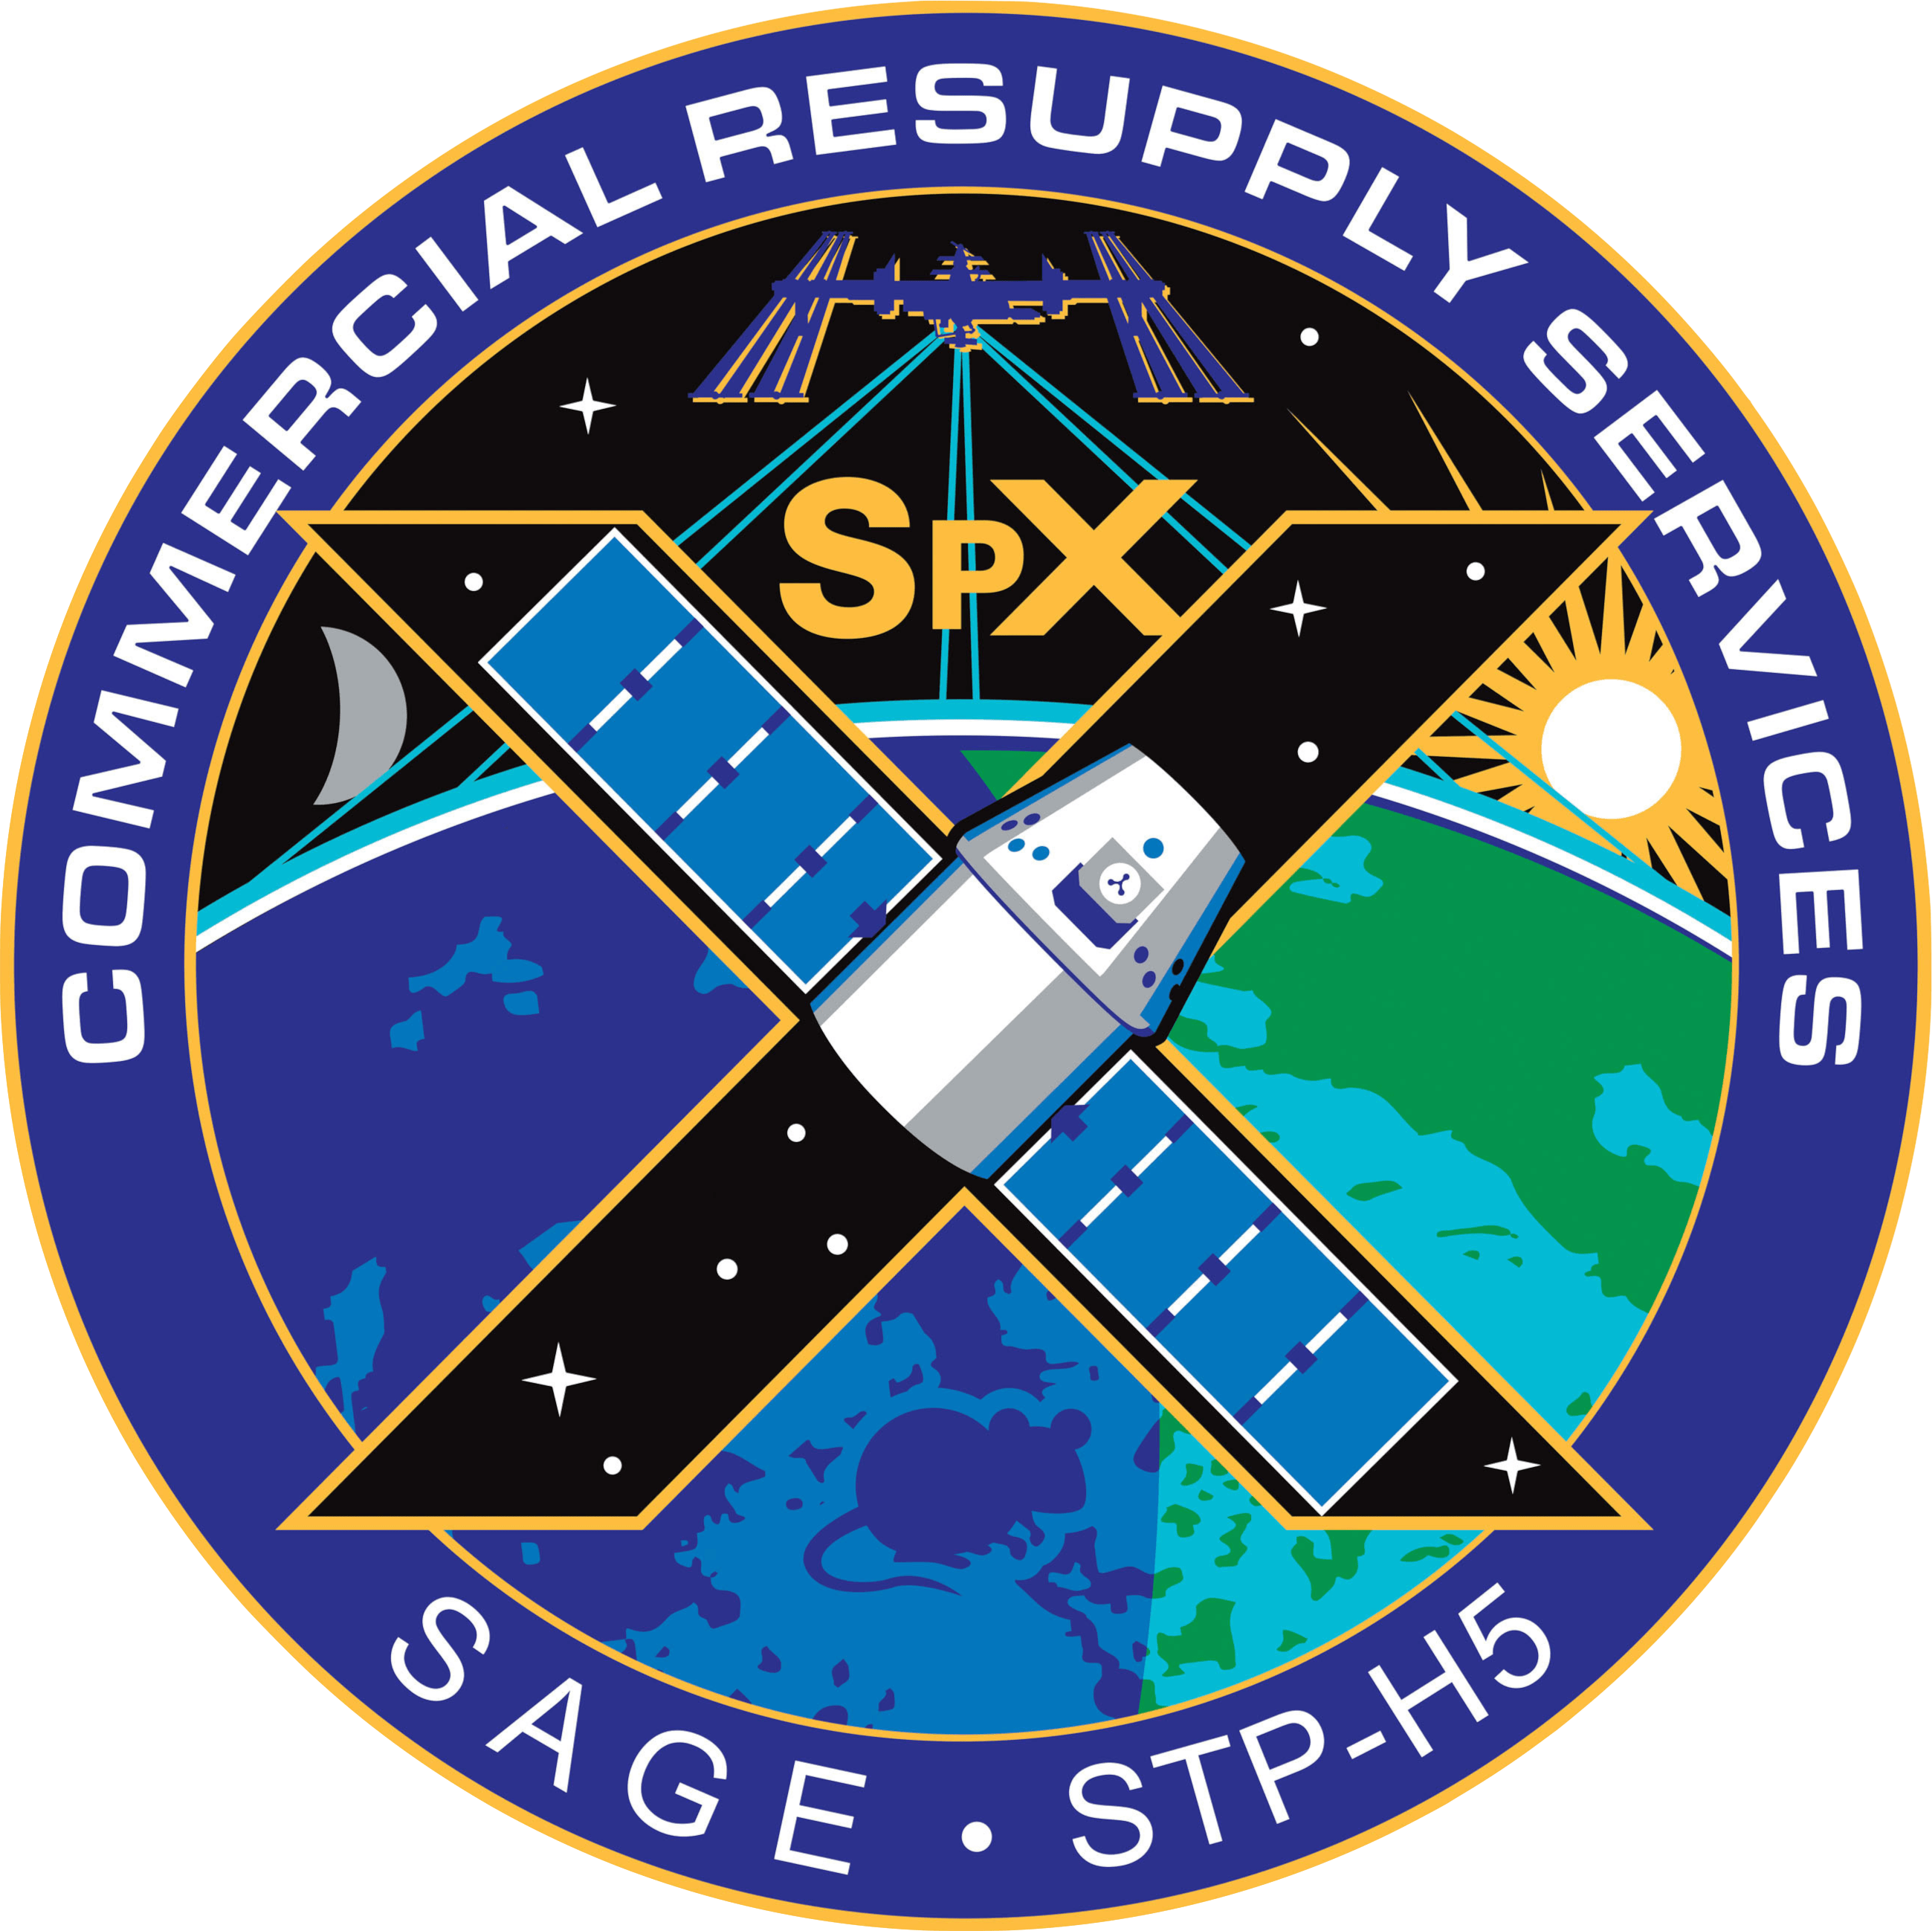 10 Mission SpaceX Logo - NASA patch for the CRS SpX-10 Mission (NOT the SpaceX patch!) : spacex